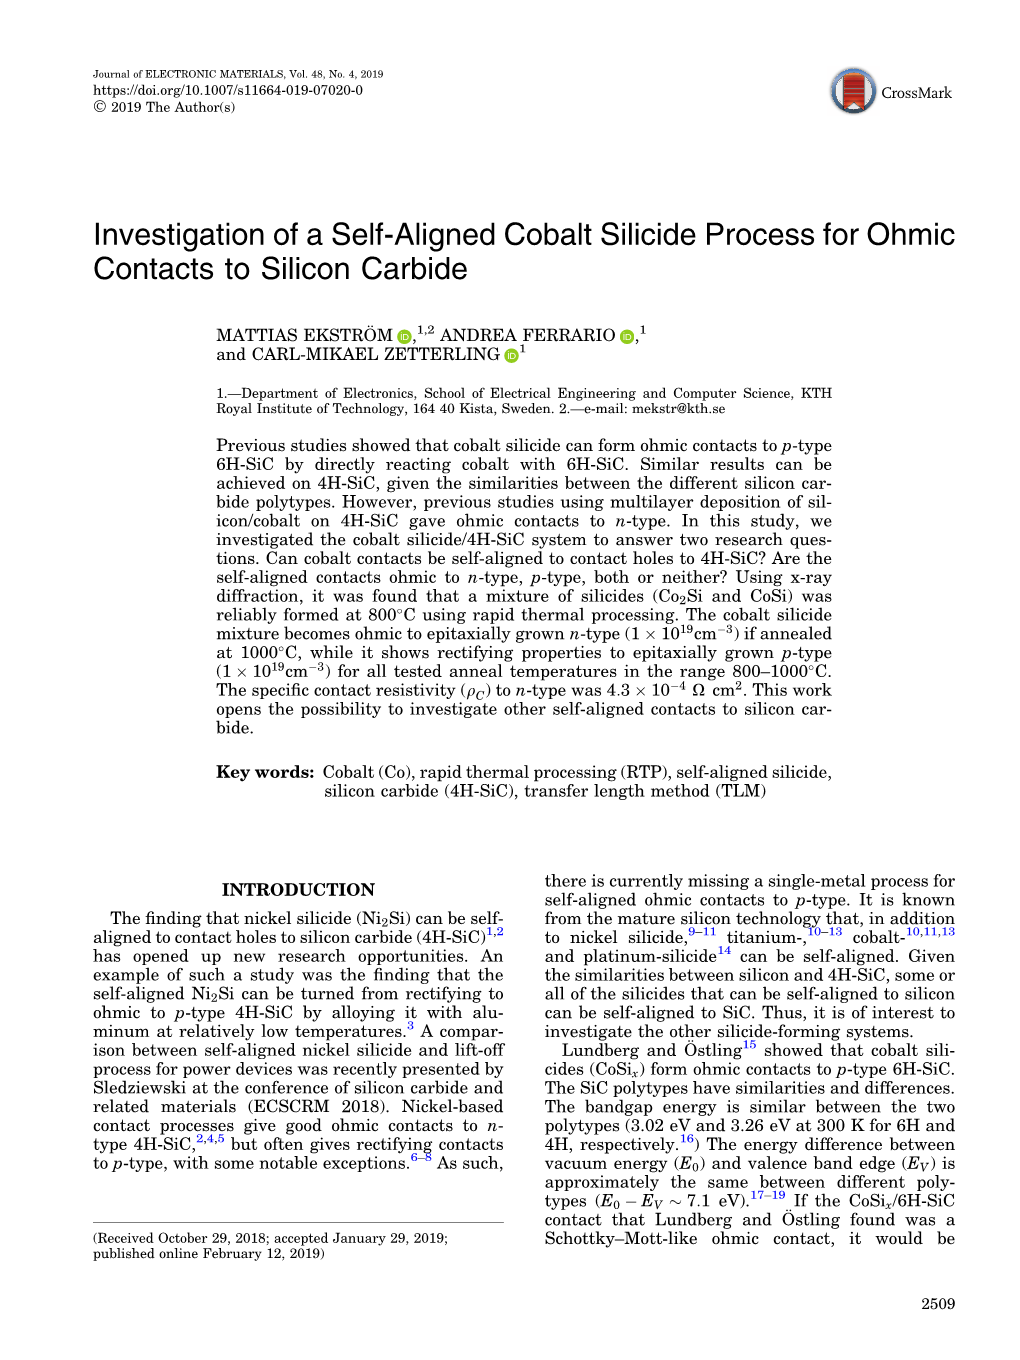 Investigation of a Self-Aligned Cobalt Silicide Process for Ohmic Contacts to Silicon Carbide